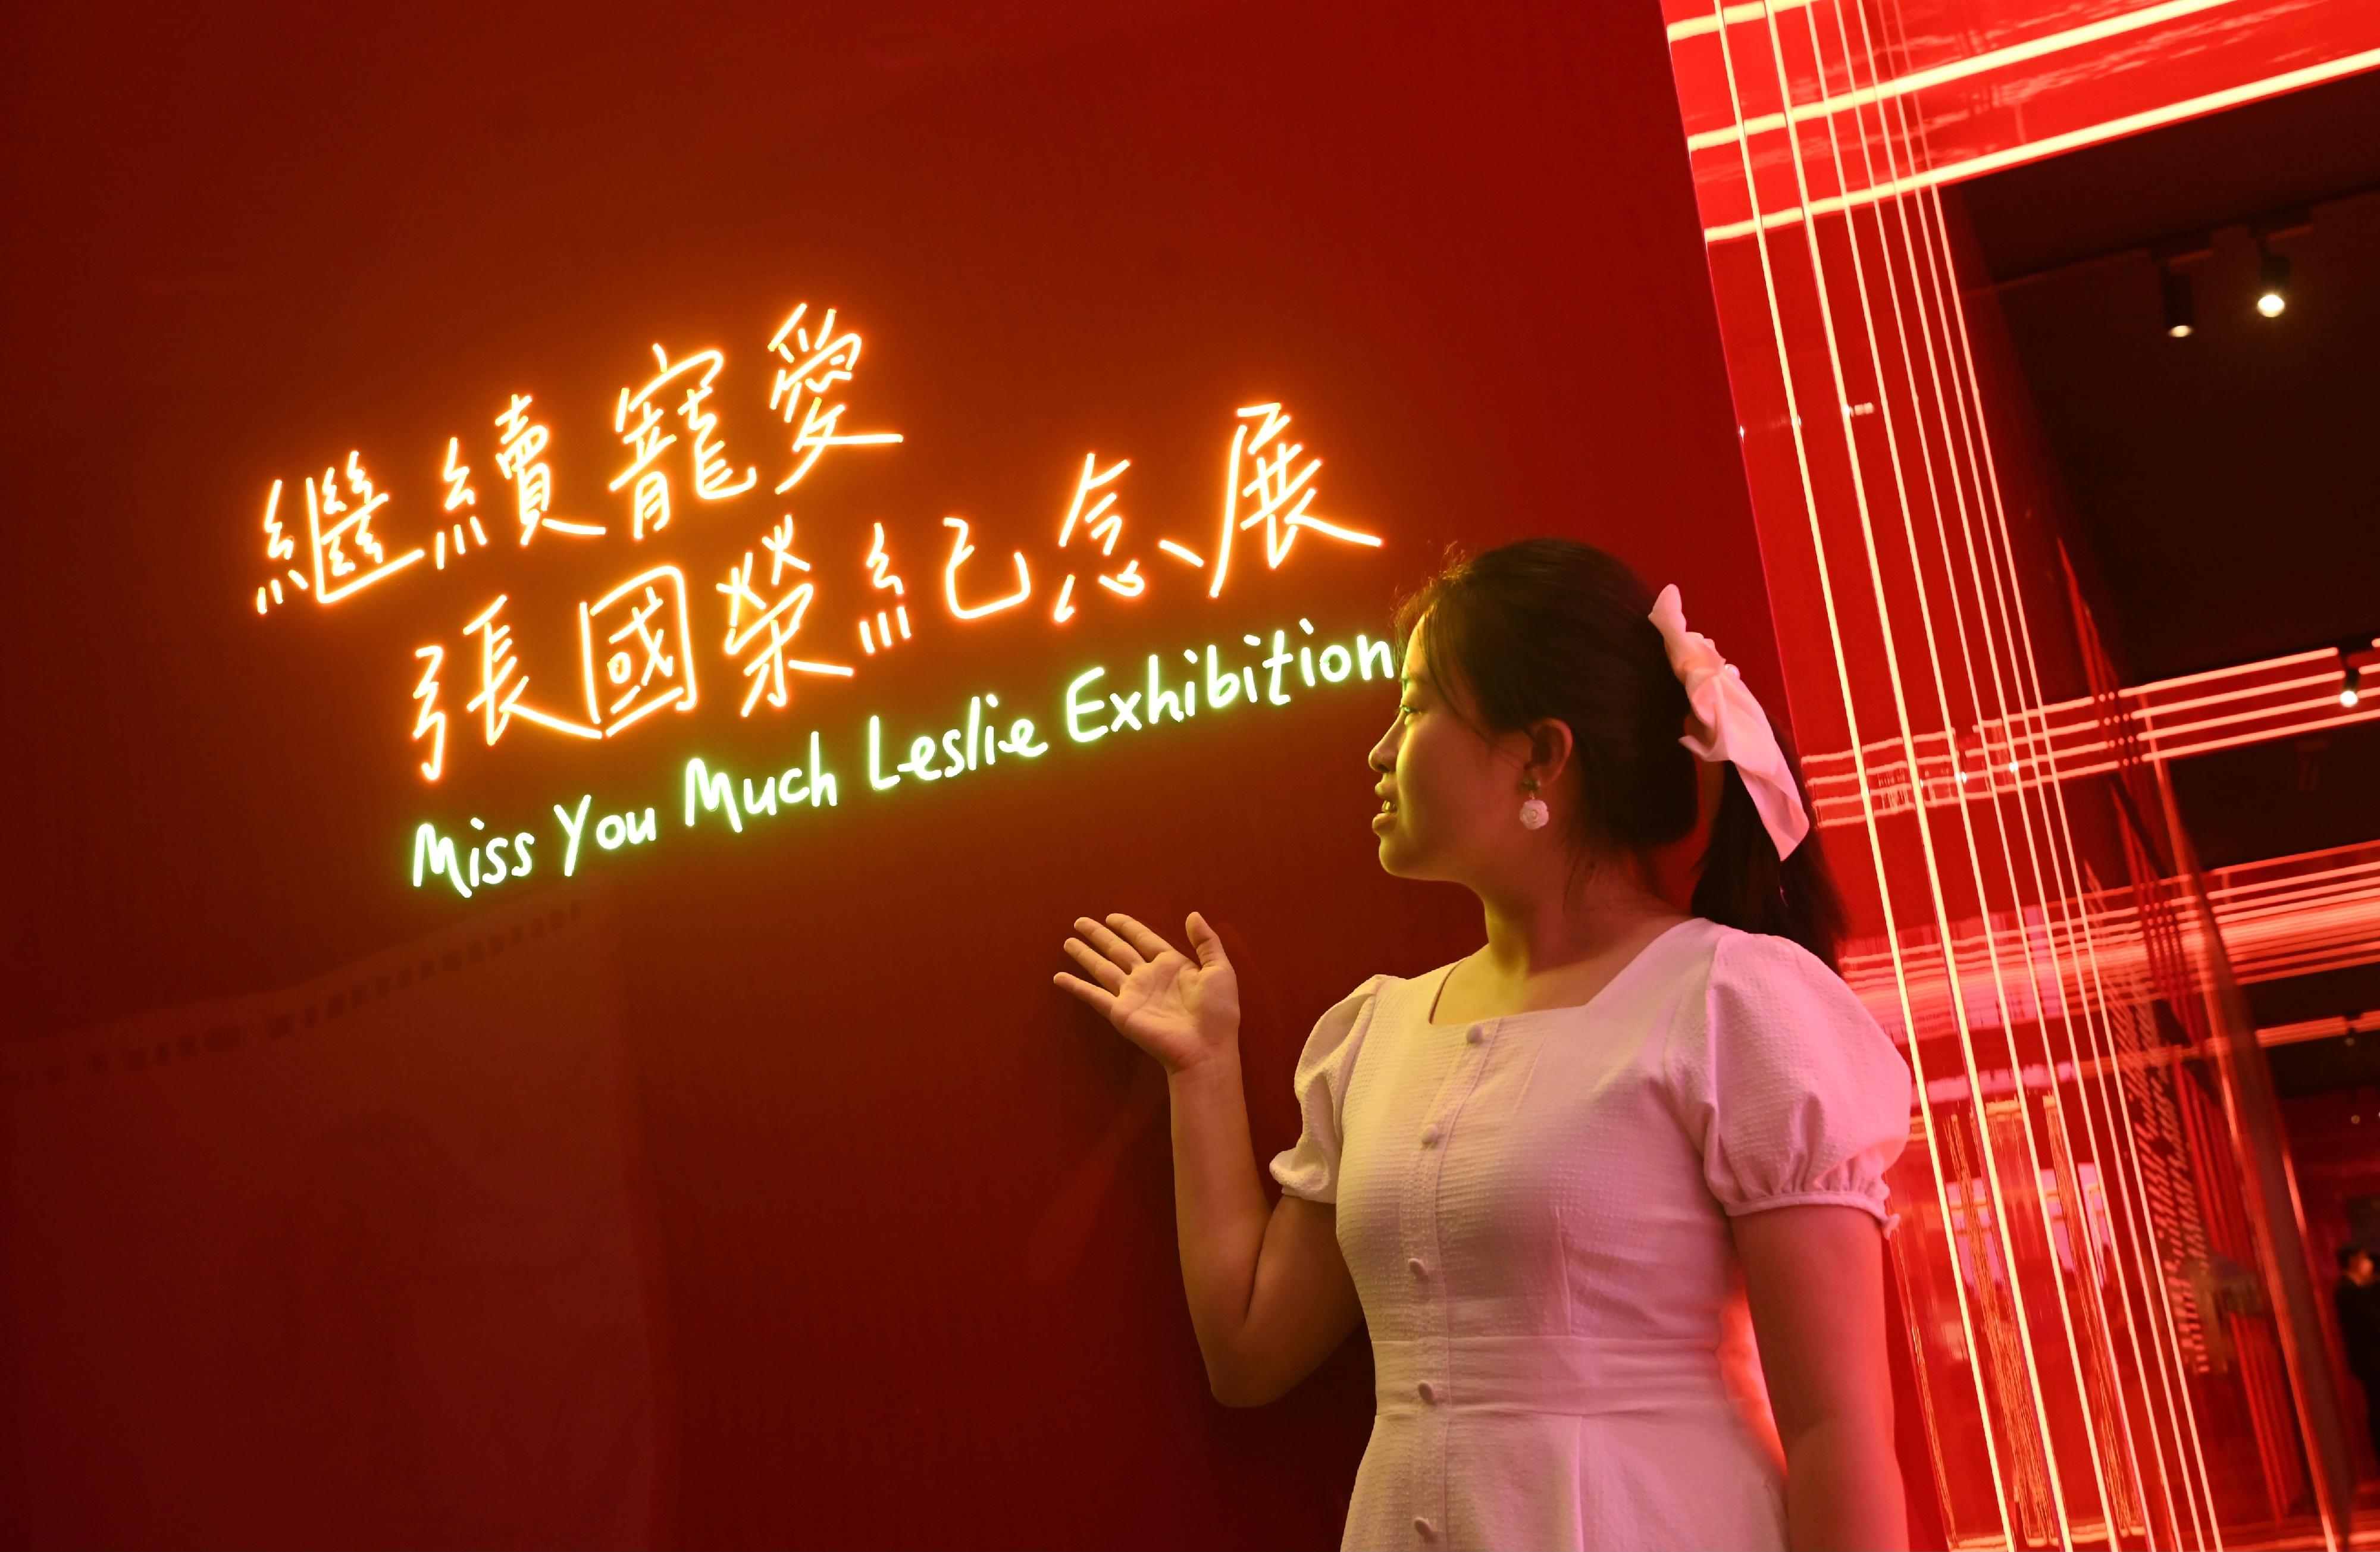 Hong Kong Heritage Museum's "Miss You Much Leslie Exhibition" has received overwhelming public response since its opening. The exhibition received its 300 000th visitor today (August 13). Photo shows a visitor touring inside the exhibition.